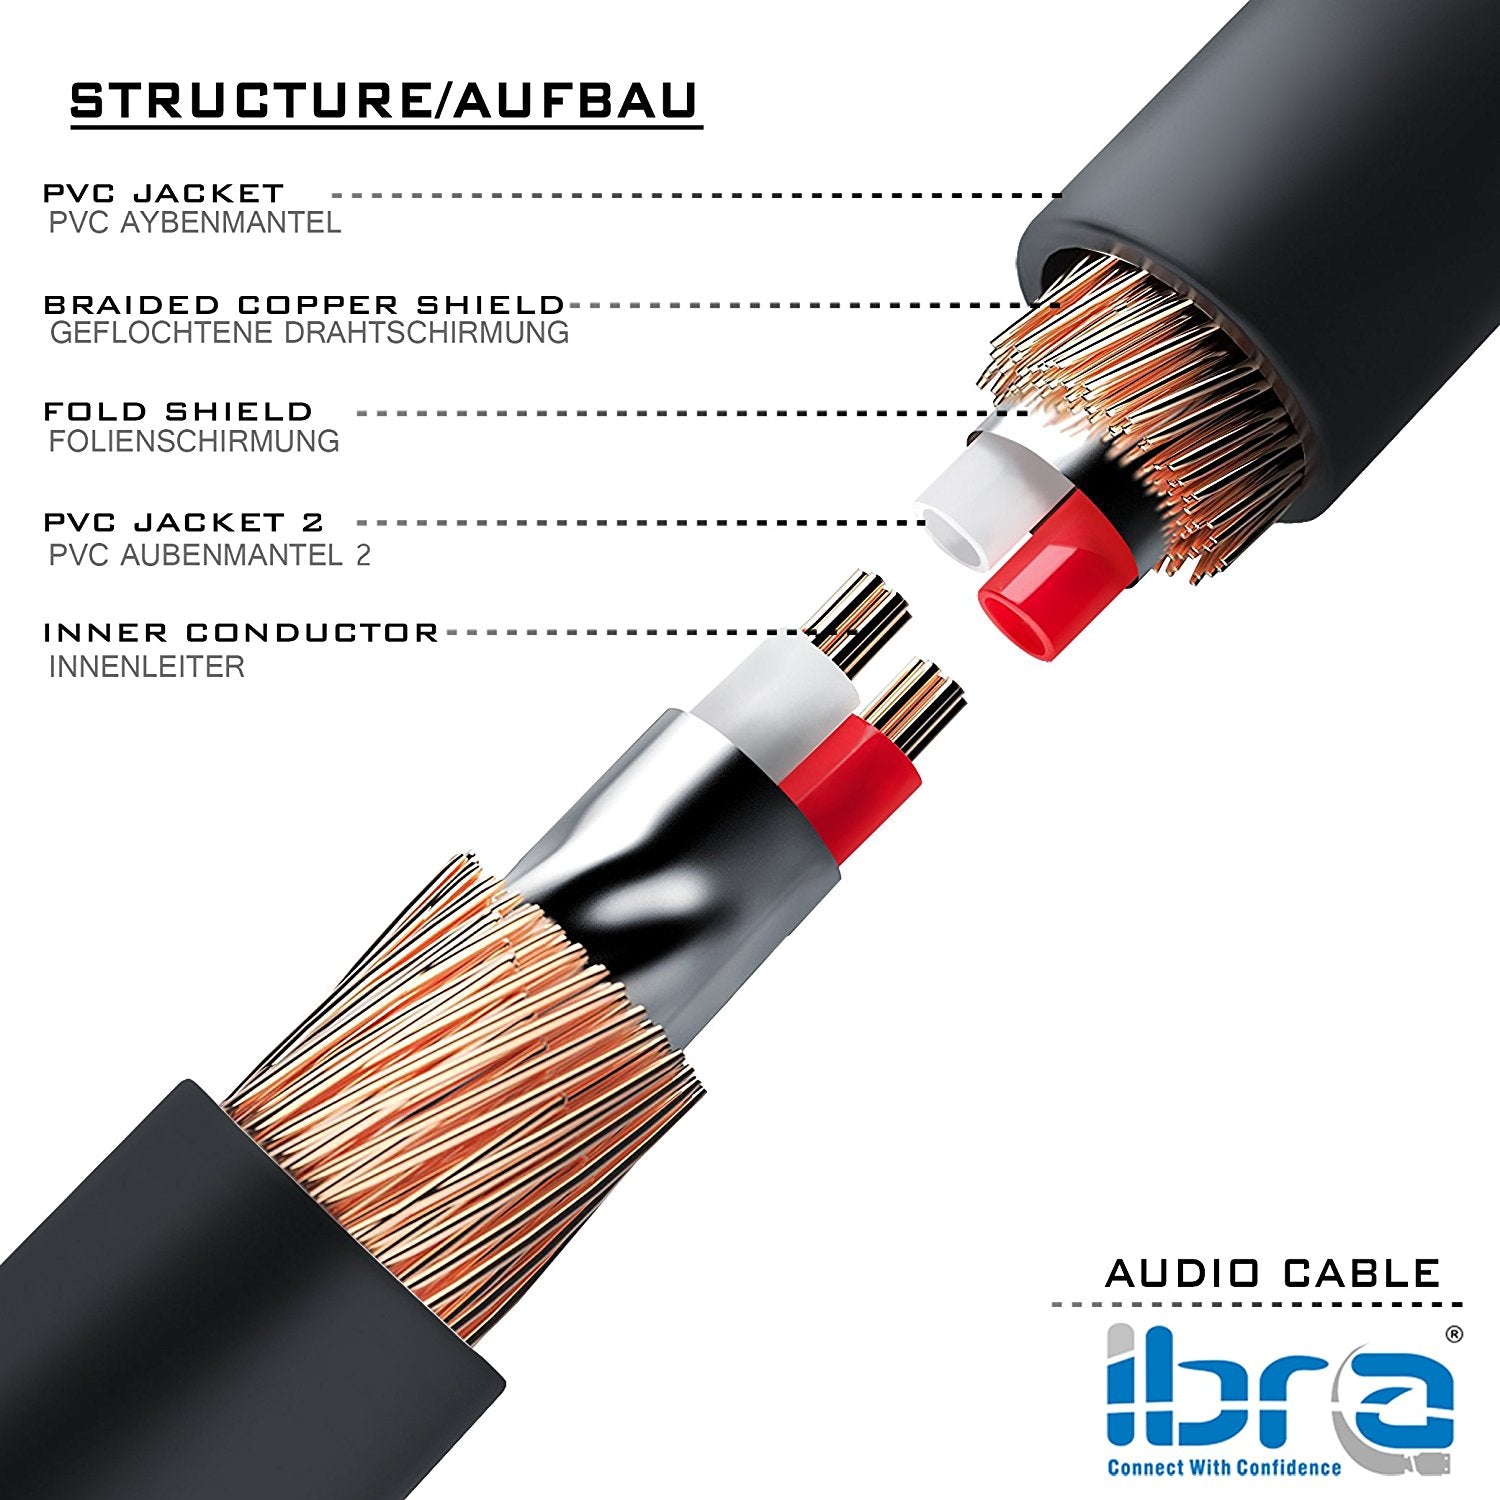 Aux Cable 1M 3.5mm Stereo Pro Auxiliary Audio Cable - for Beats Headphones Apple iPod iPhone iPad Samsung LG Smartphone MP3 Player Home / Car etc - IBRA Black